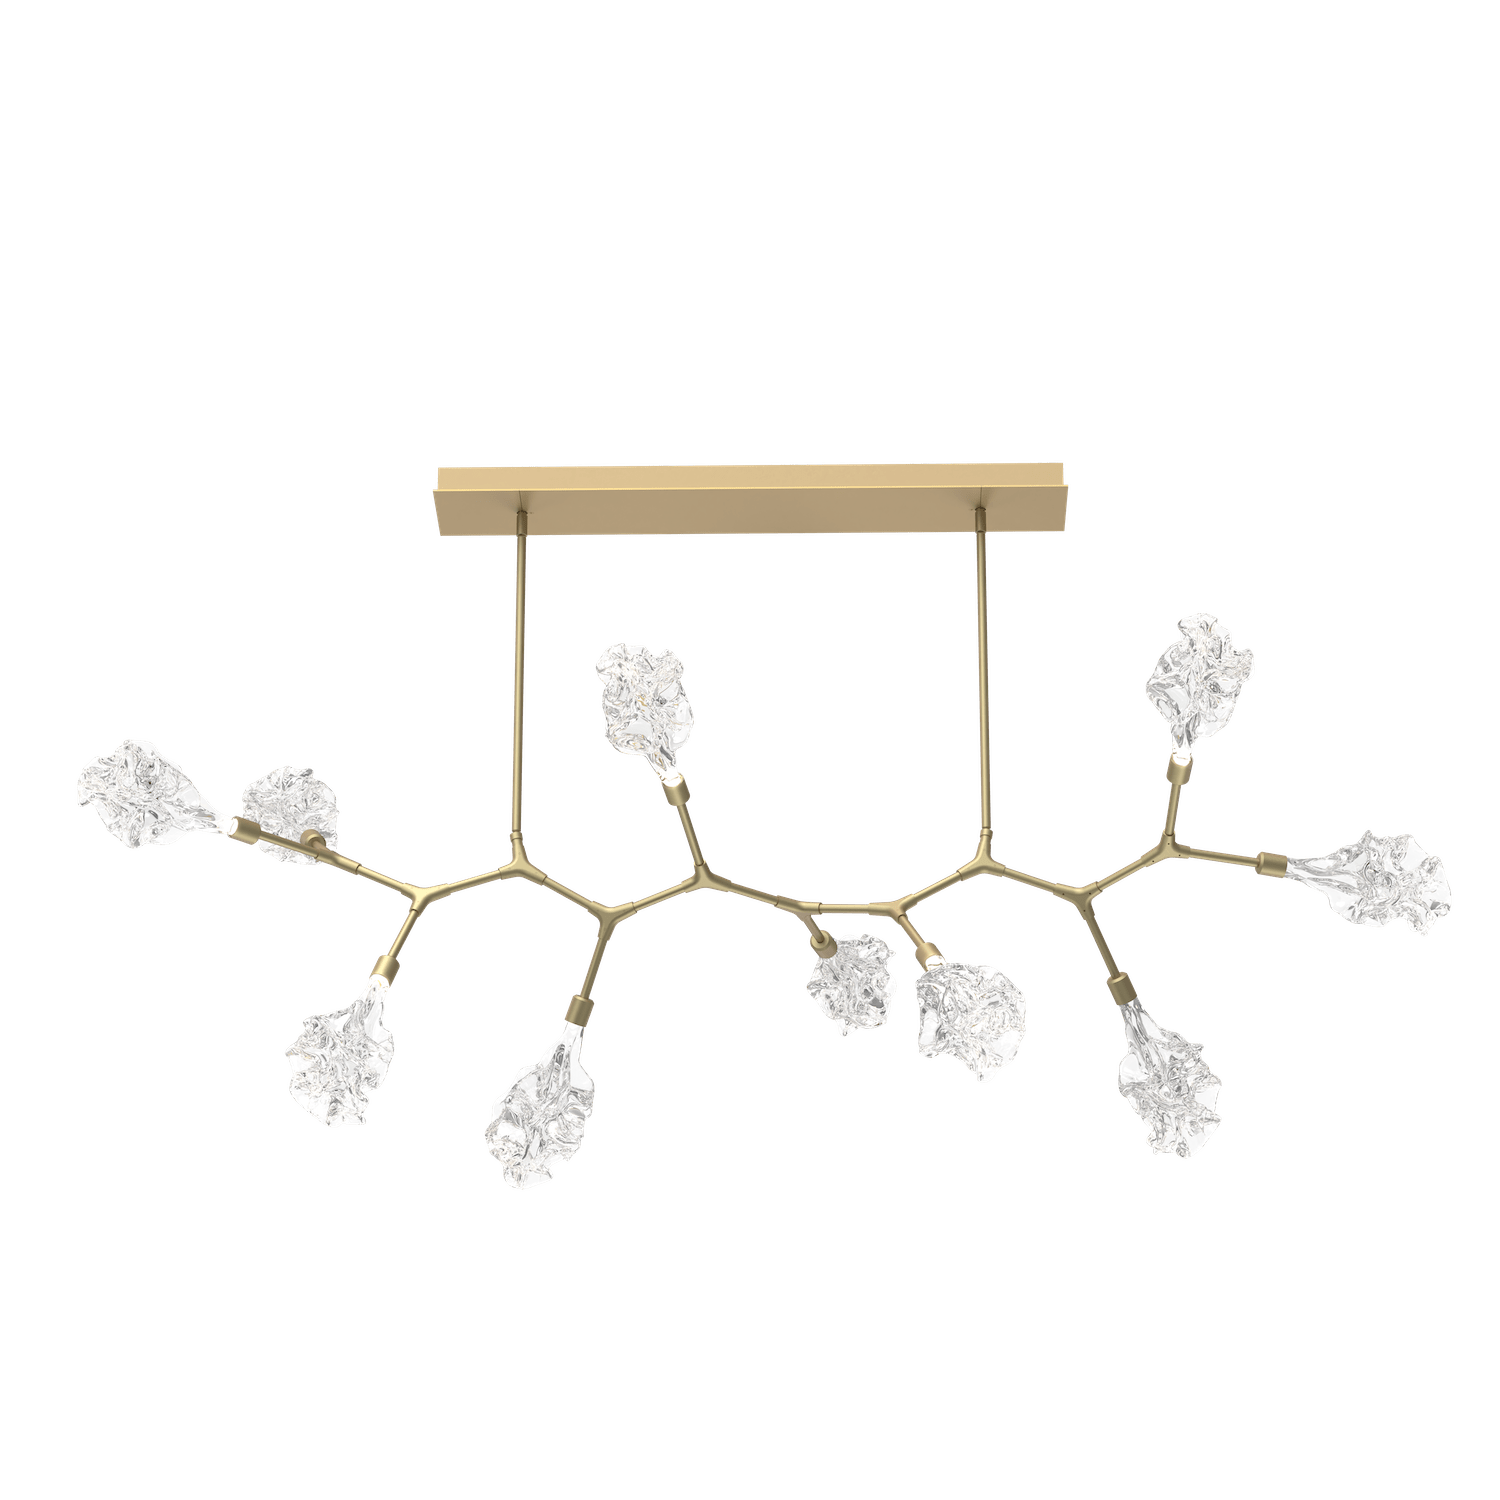 PLB0059-BC-GB-Hammerton-Studio-Blossom-10-light-modern-branch-chandelier-with-gilded-brass-finish-and-clear-blossom-shaped-blown-glass-shades-and-LED-lamping